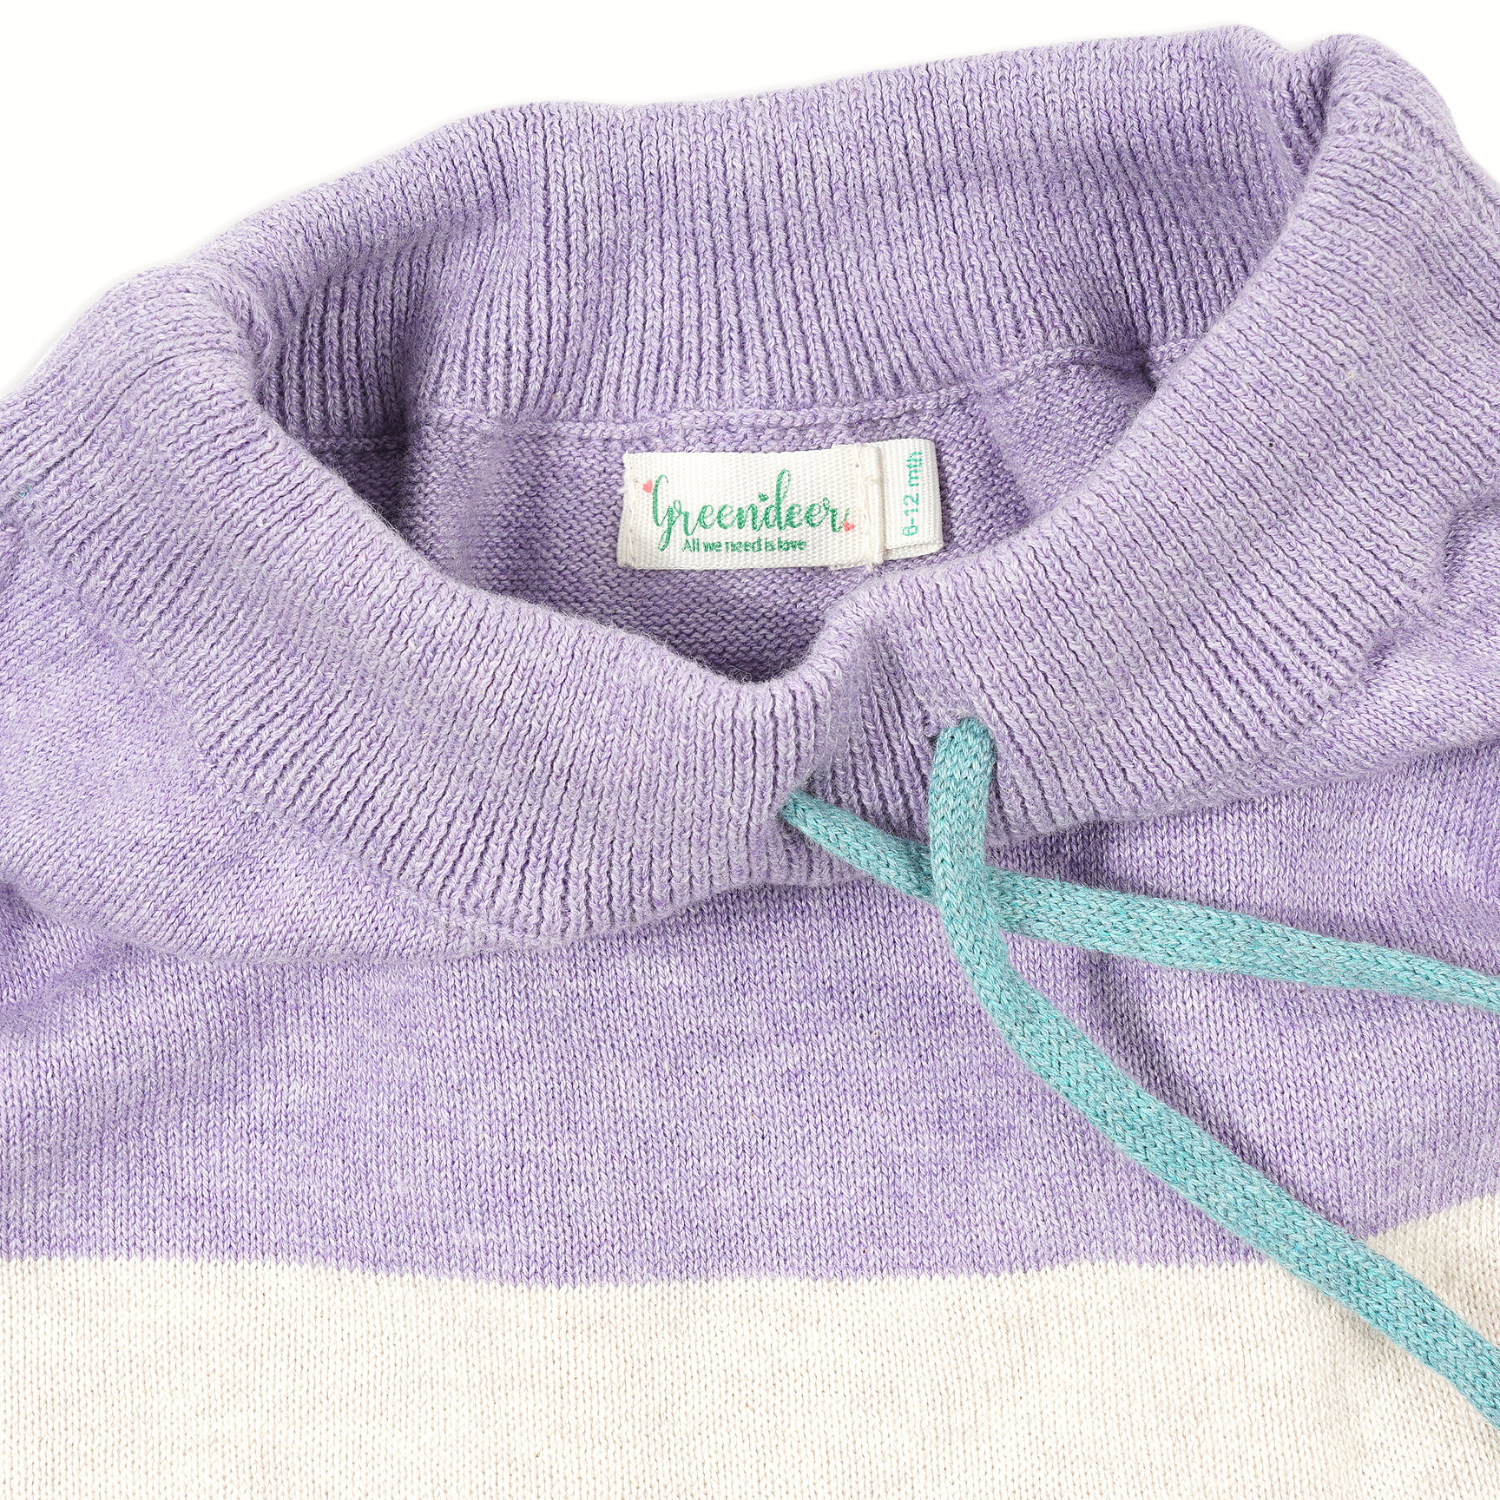 Lavender Sheep love Sweater and Lower Combo Set of 3